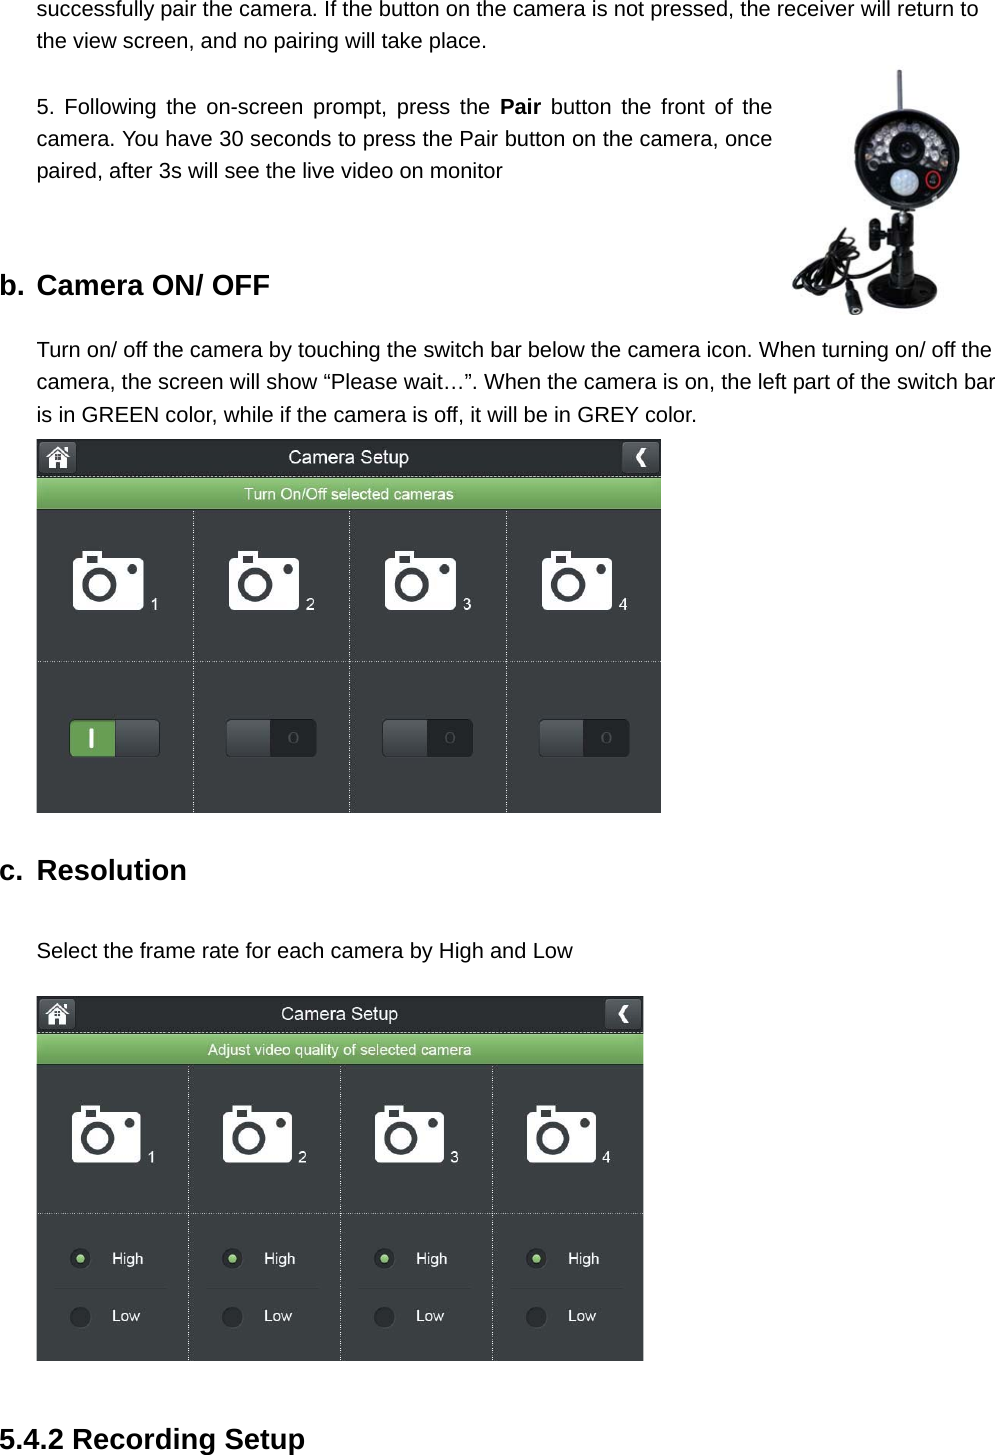 successfully pair the camera. If the button on the camera is not pressed, the receiver will return to the view screen, and no pairing will take place.  5. Following the on-screen prompt, press the Pair button the front of the camera. You have 30 seconds to press the Pair button on the camera, once paired, after 3s will see the live video on monitor     b. Camera ON/ OFF Turn on/ off the camera by touching the switch bar below the camera icon. When turning on/ off the camera, the screen will show “Please wait…”. When the camera is on, the left part of the switch bar is in GREEN color, while if the camera is off, it will be in GREY color.  c. Resolution Select the frame rate for each camera by High and Low   5.4.2 Recording Setup 